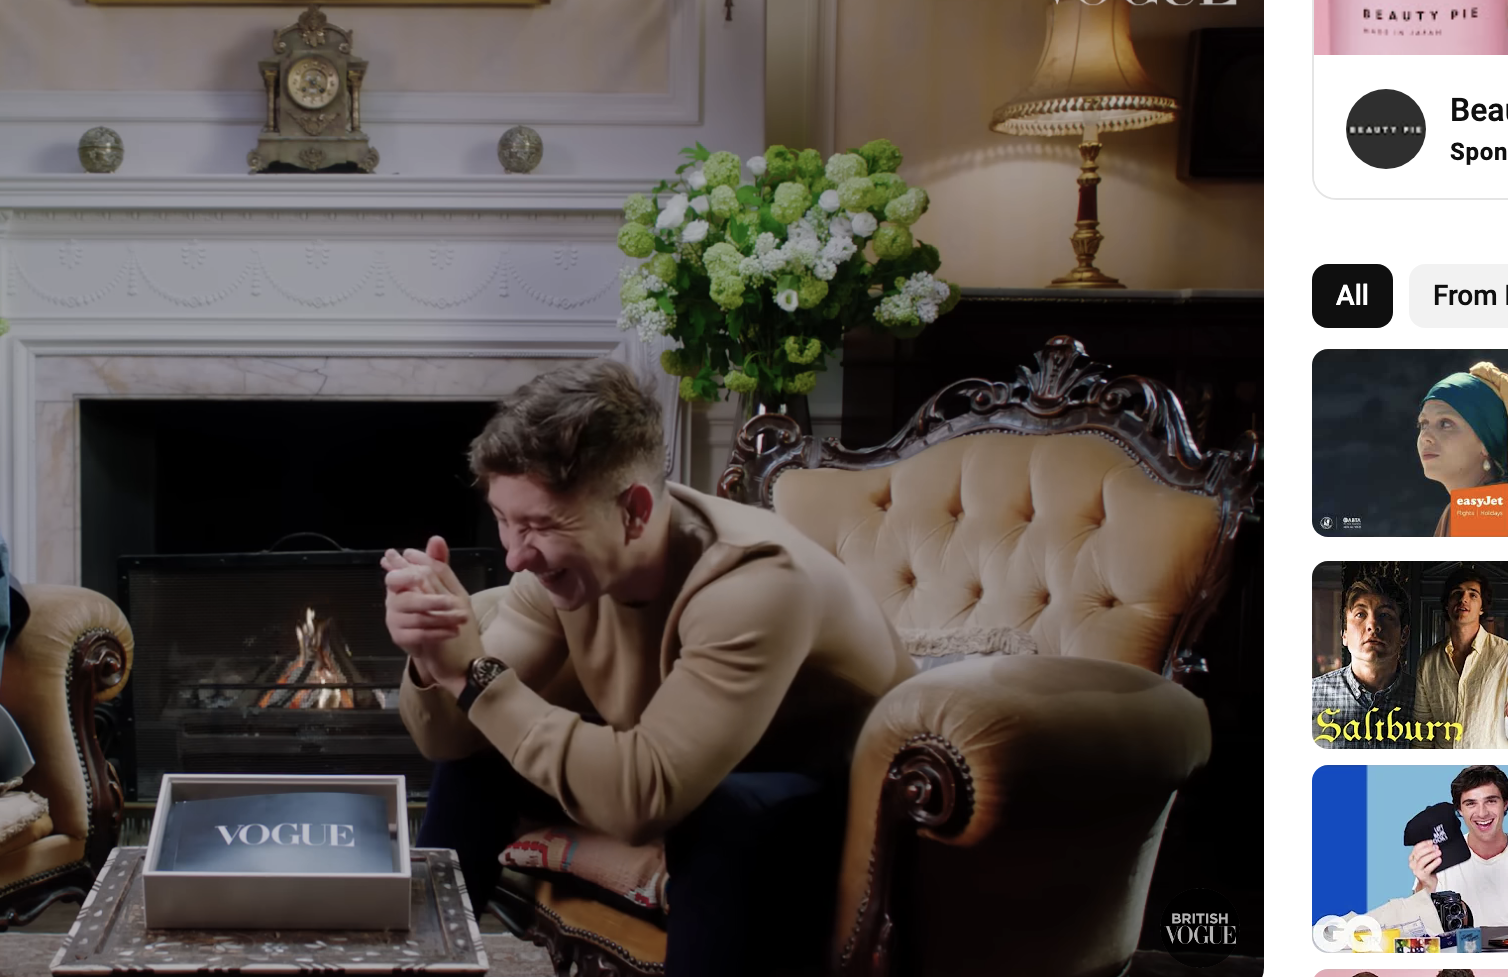 Jacob and Barry sitting and laughing together in front of a fireplace